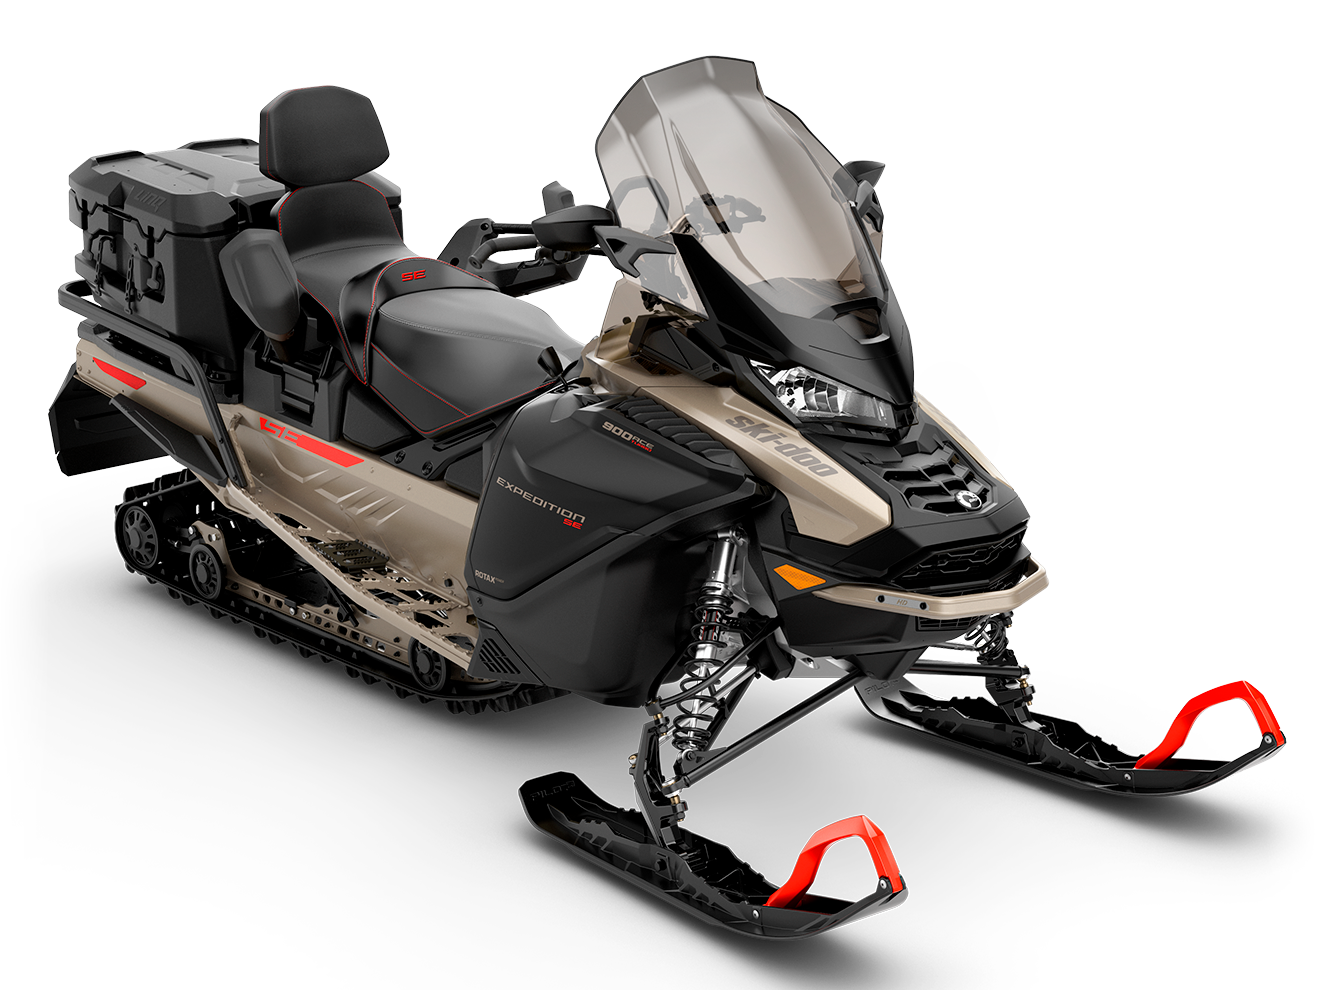 2023 SkiDoo Expedition for sale Crossover snowmobile & Sleds